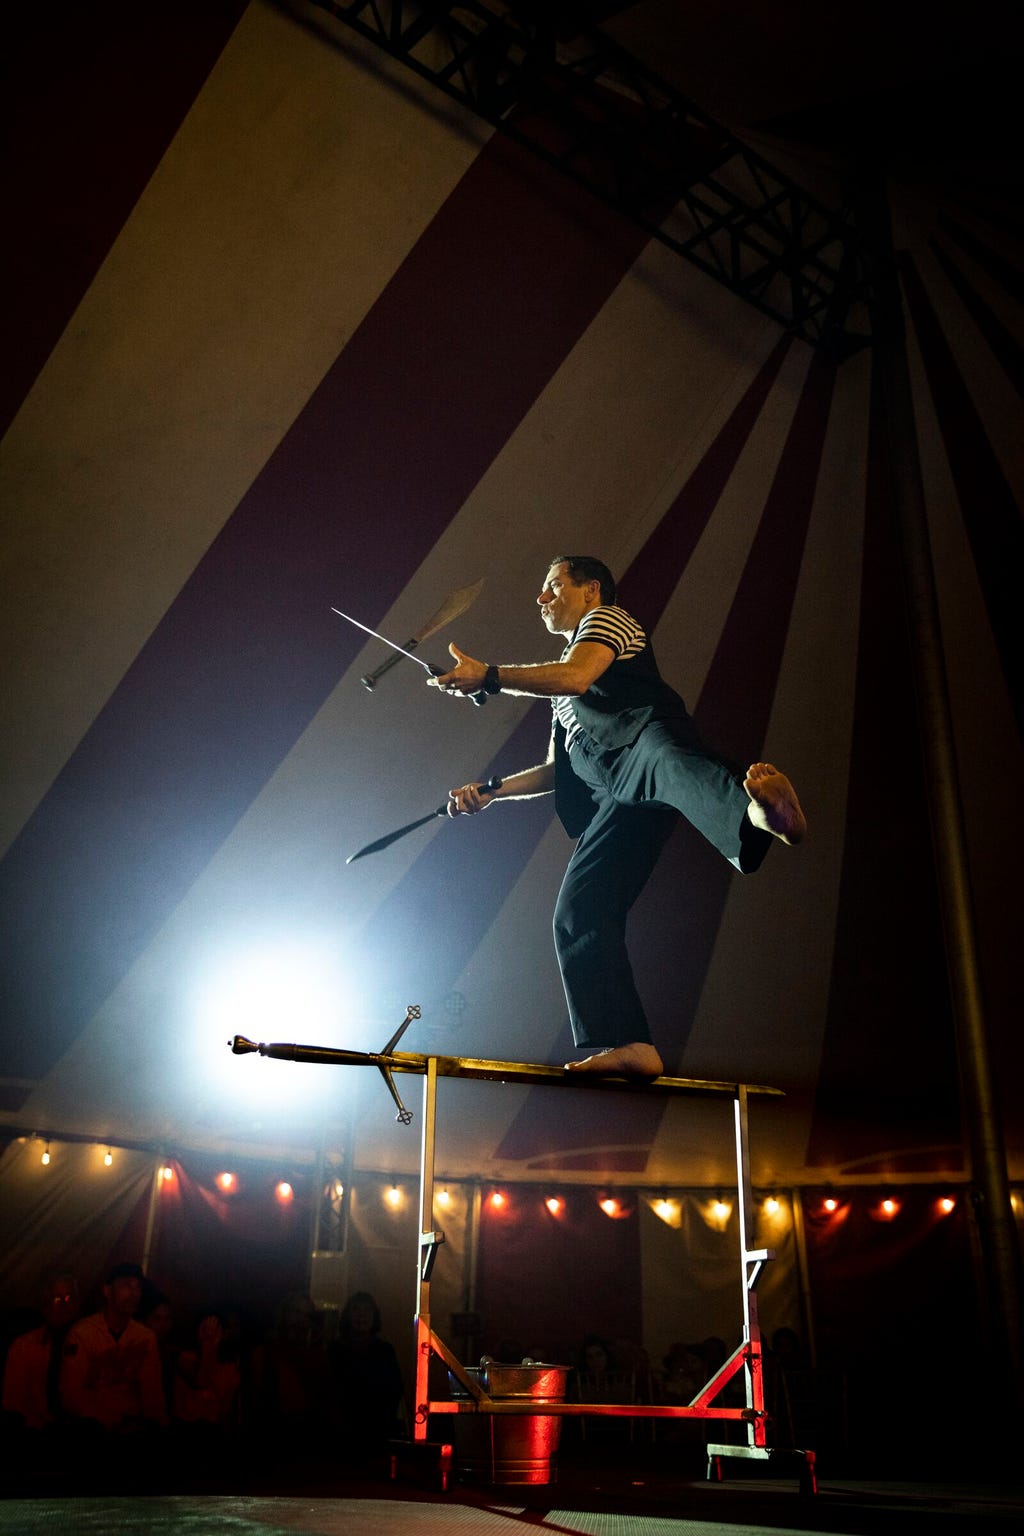 A performer juggles knives. Venardos Circus will make a stop in Shreveport for shows March 4-15 at Riverview Park.